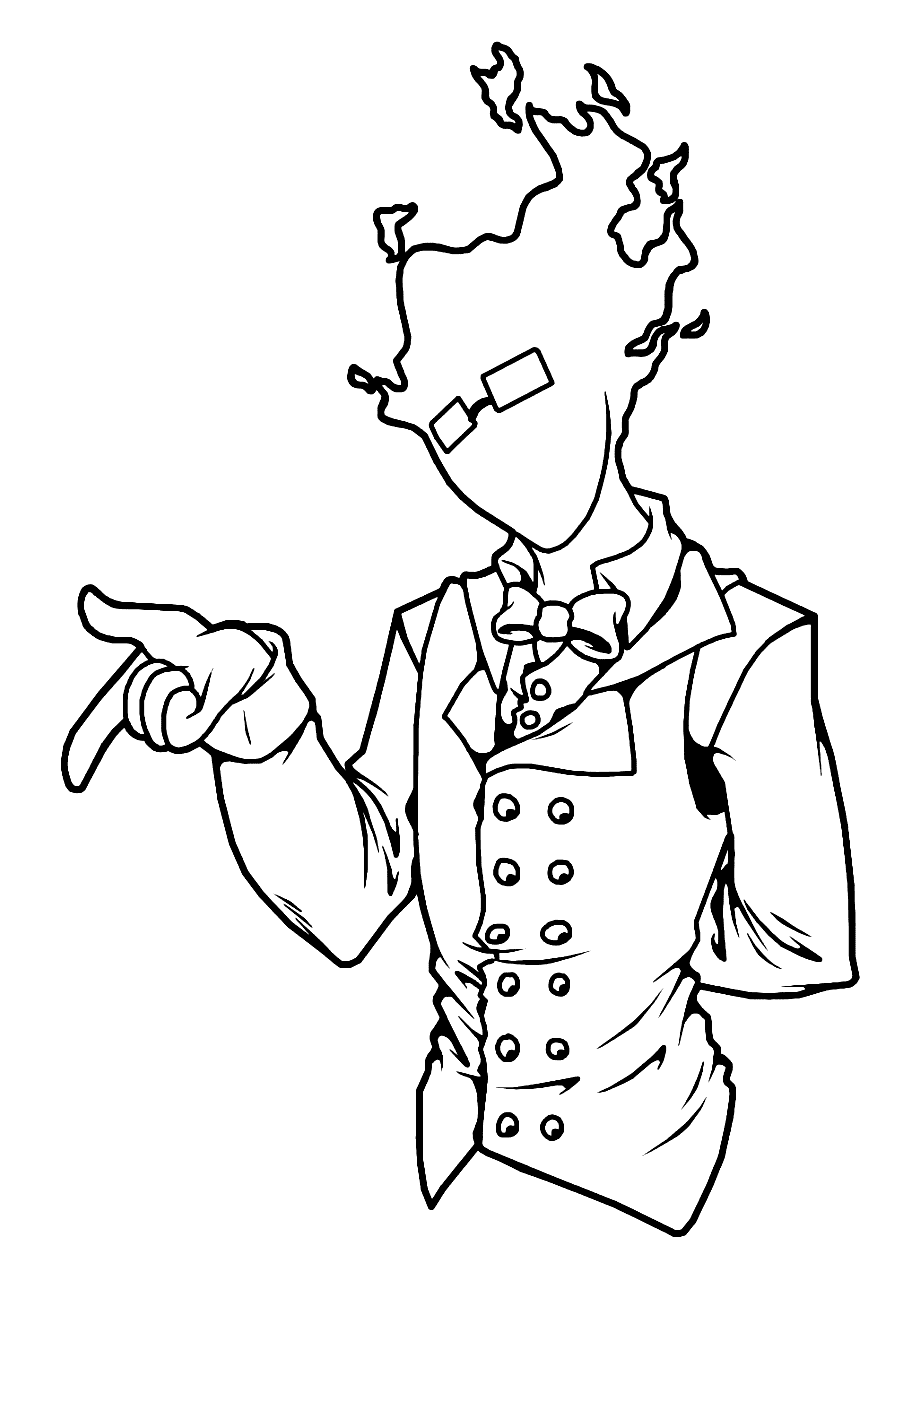 Grillby from Undertale Coloring Pages